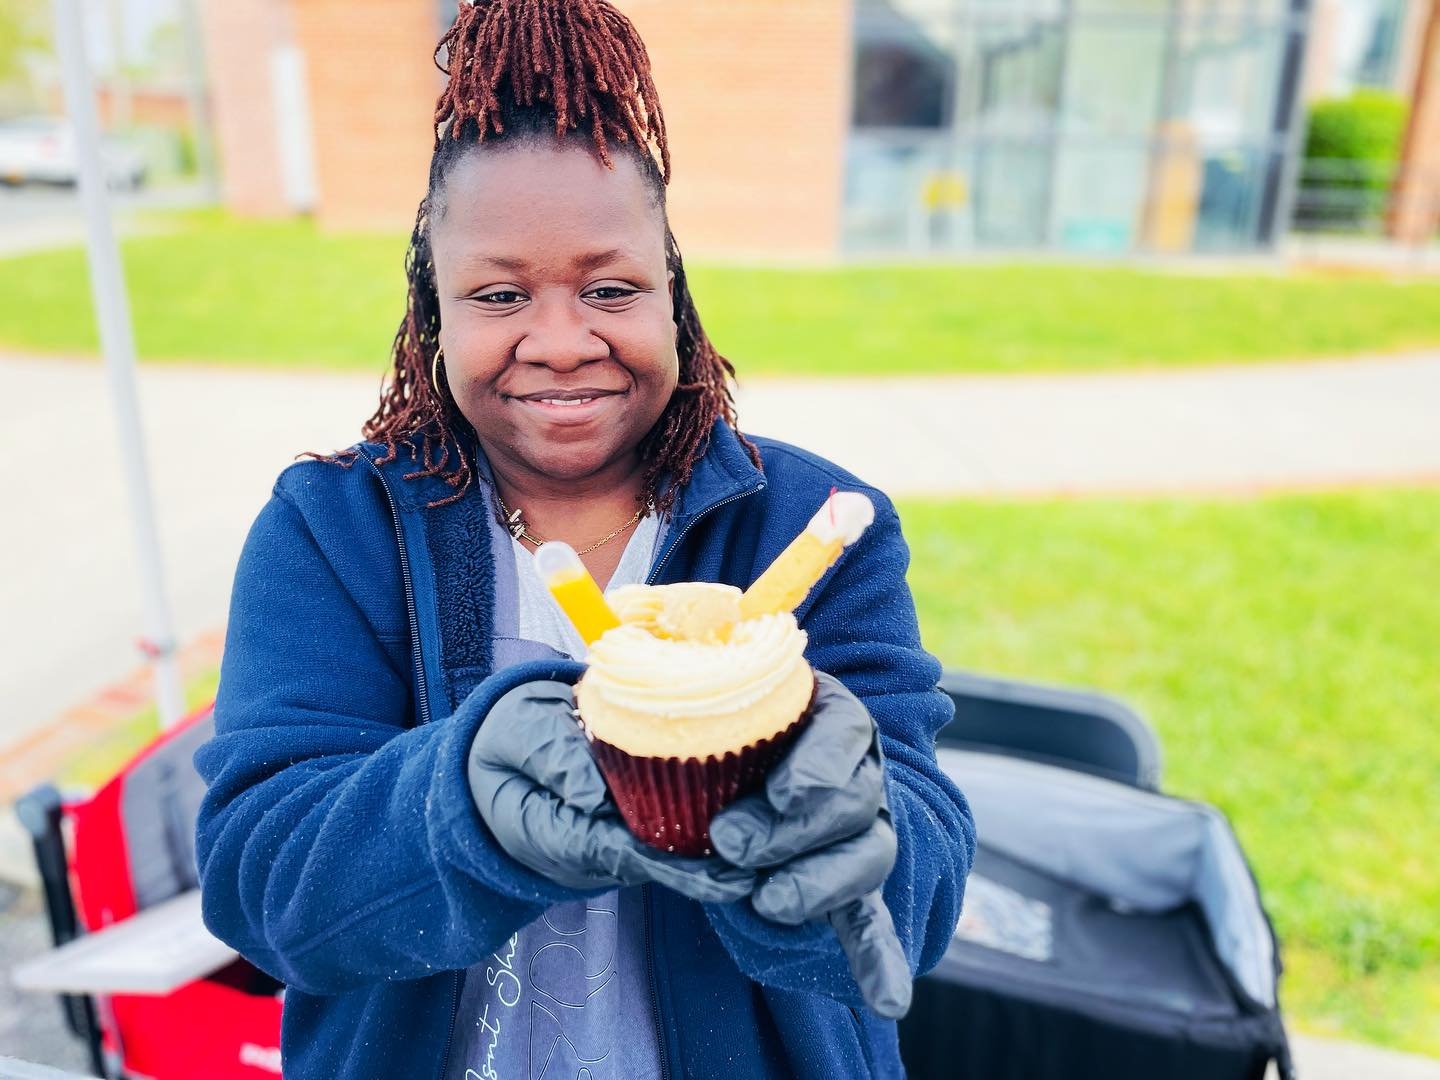 6 only - TODAY! Mango Lassi cupcake, filled with Mango curd, saffron cookie on top, cardamom flavor base with a mango lassi &mdash; pipette&mdash; drink infusion. @isntshelovelytvb 

See you soon! ☀️💐 Every Sunday. 10-2. @beaconfarmersmarket Voted B